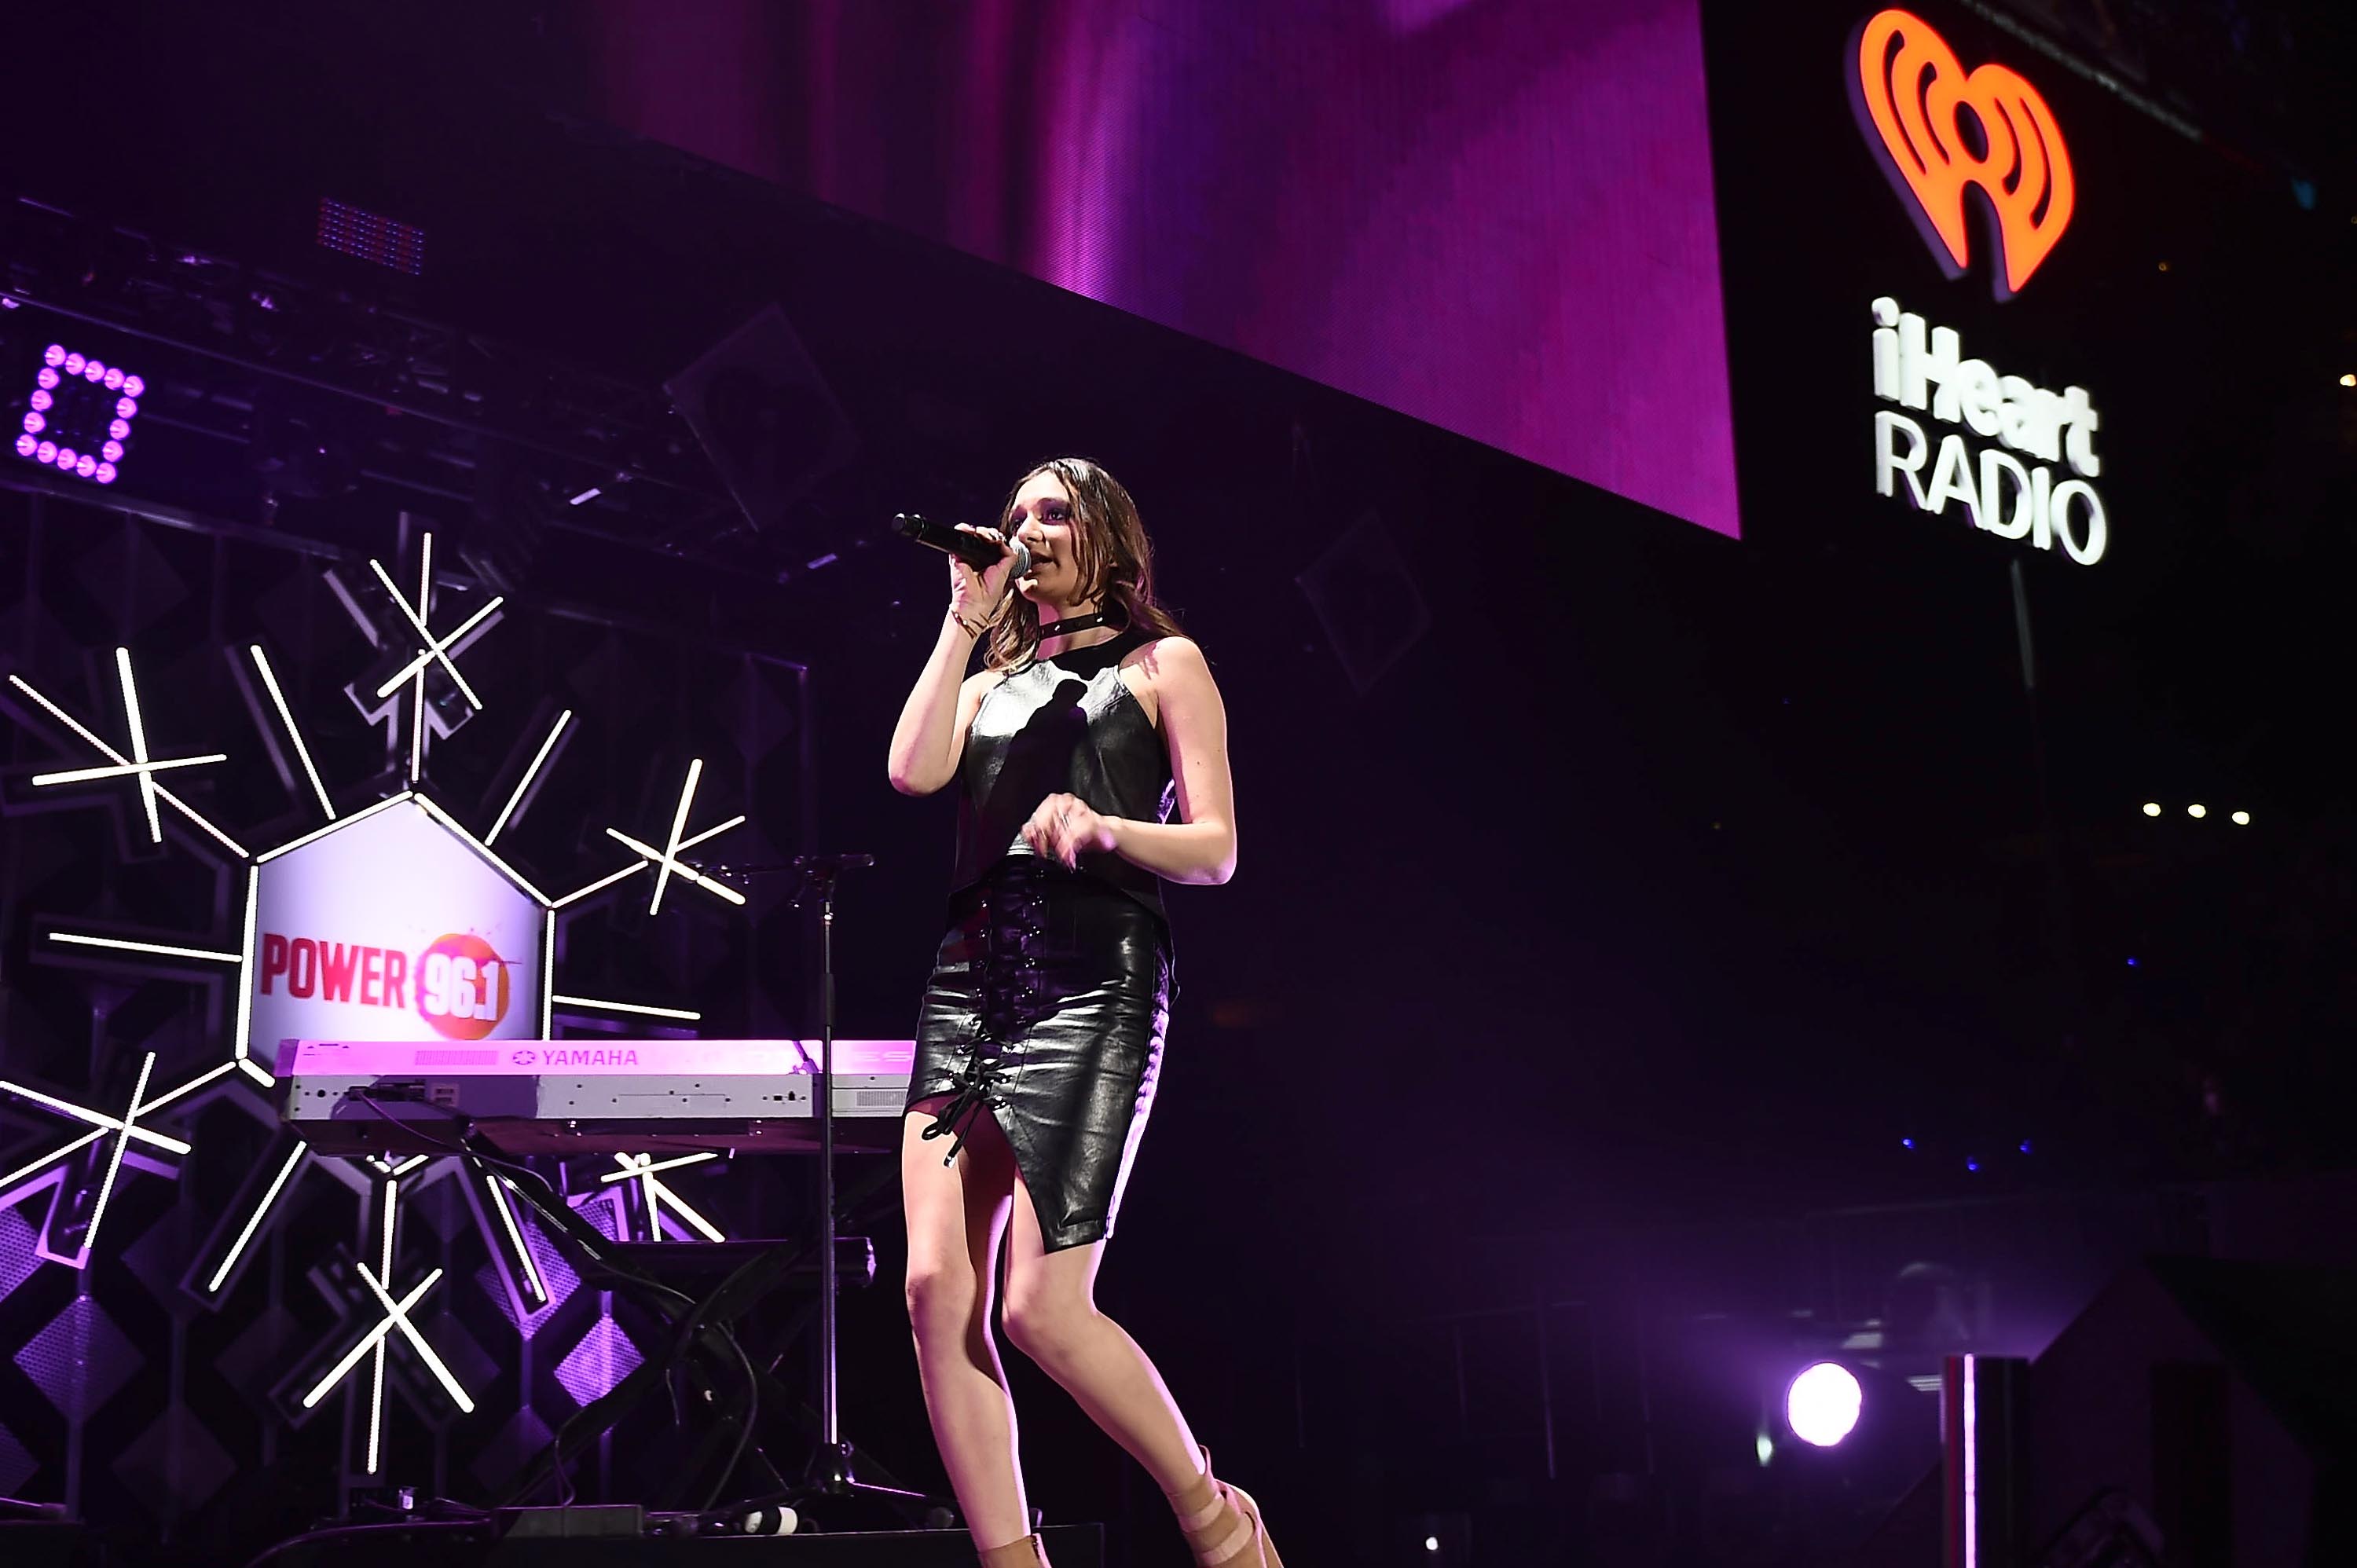 Daya performs on stage at Phillips Arena